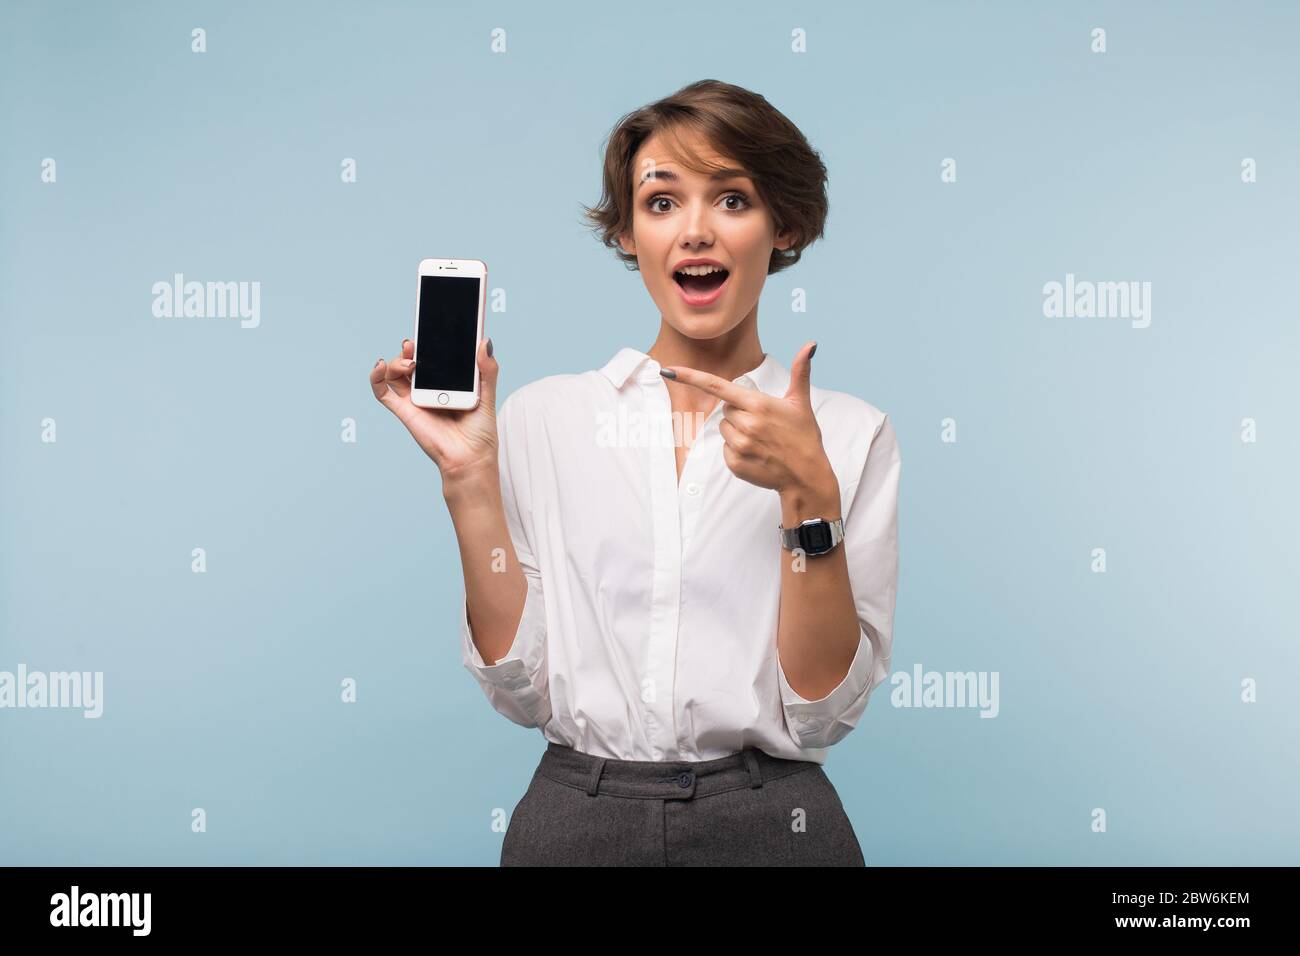 Young joyfull woman with dark short hair in white shirt amazedly showing cellphone on camera over blue background isolated Stock Photo